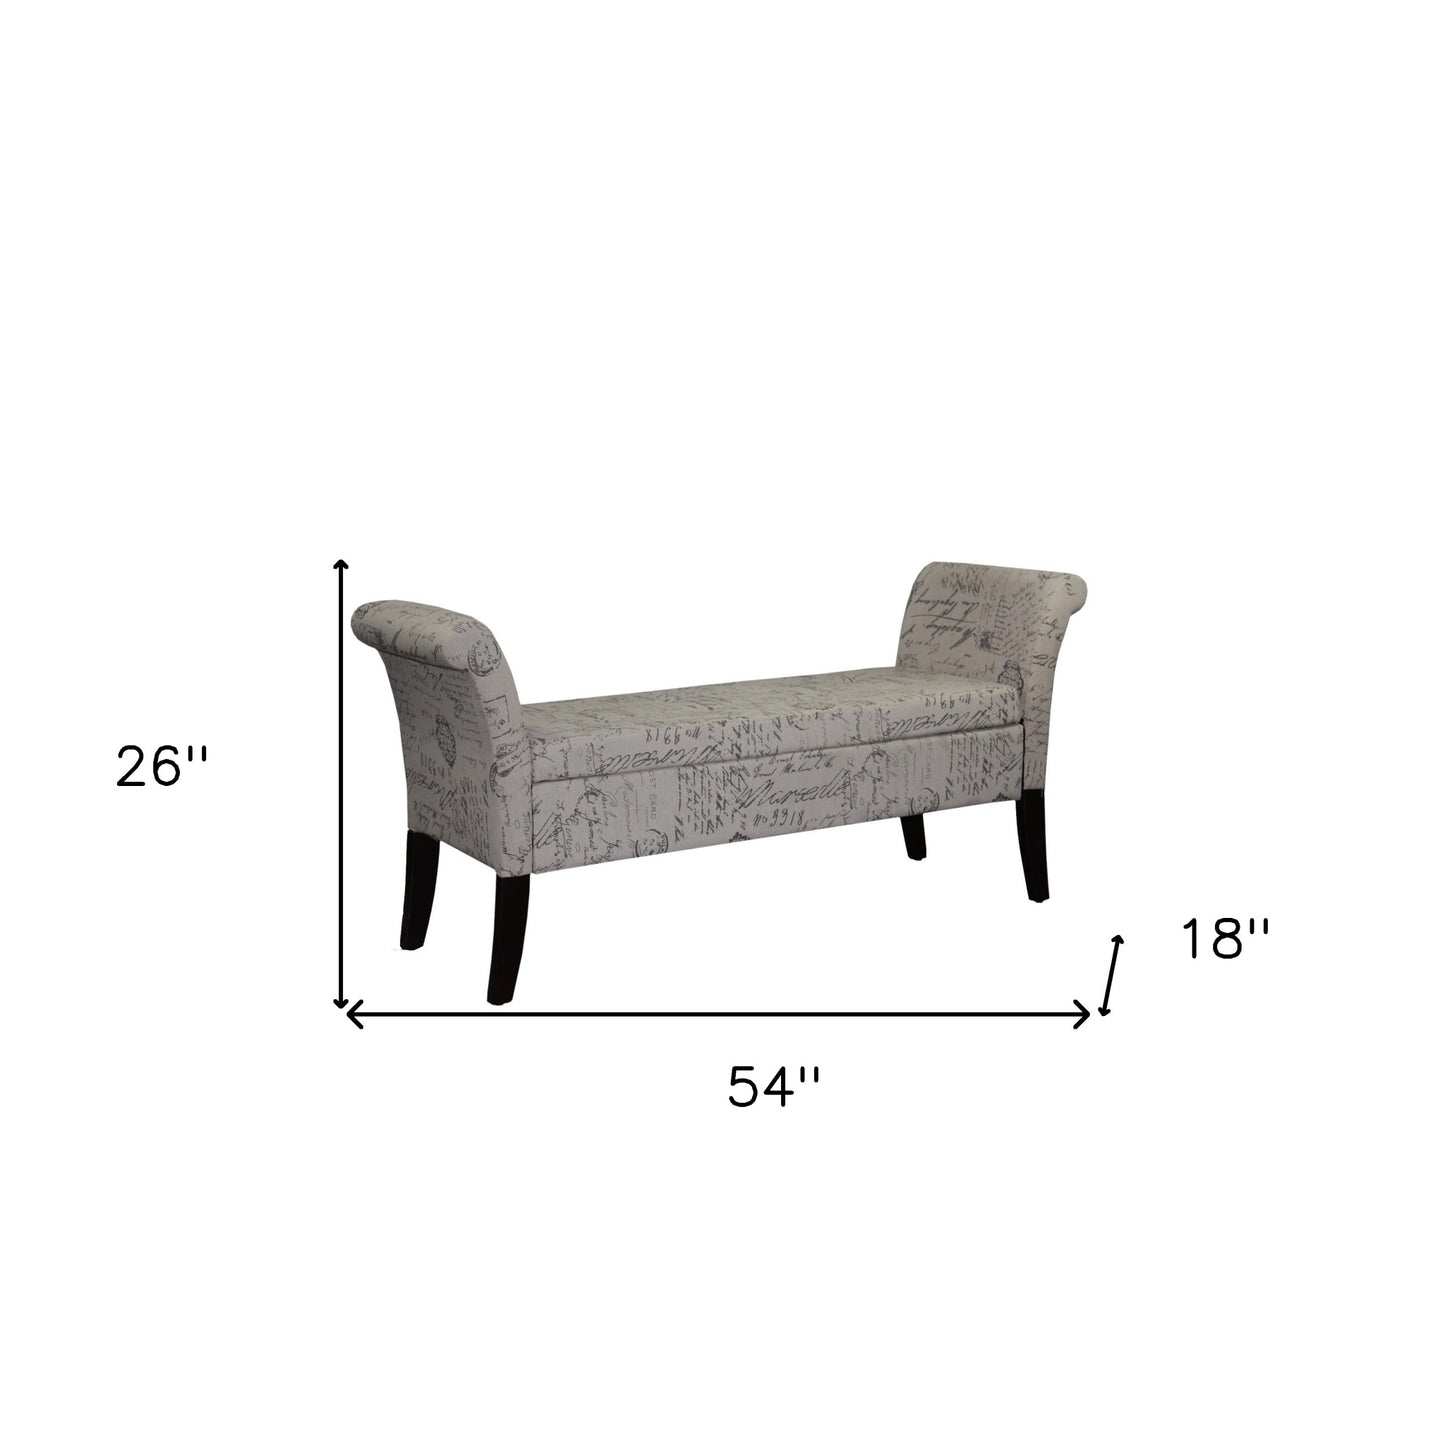 54" Black and White Upholstered Polyester Bench with Flip top